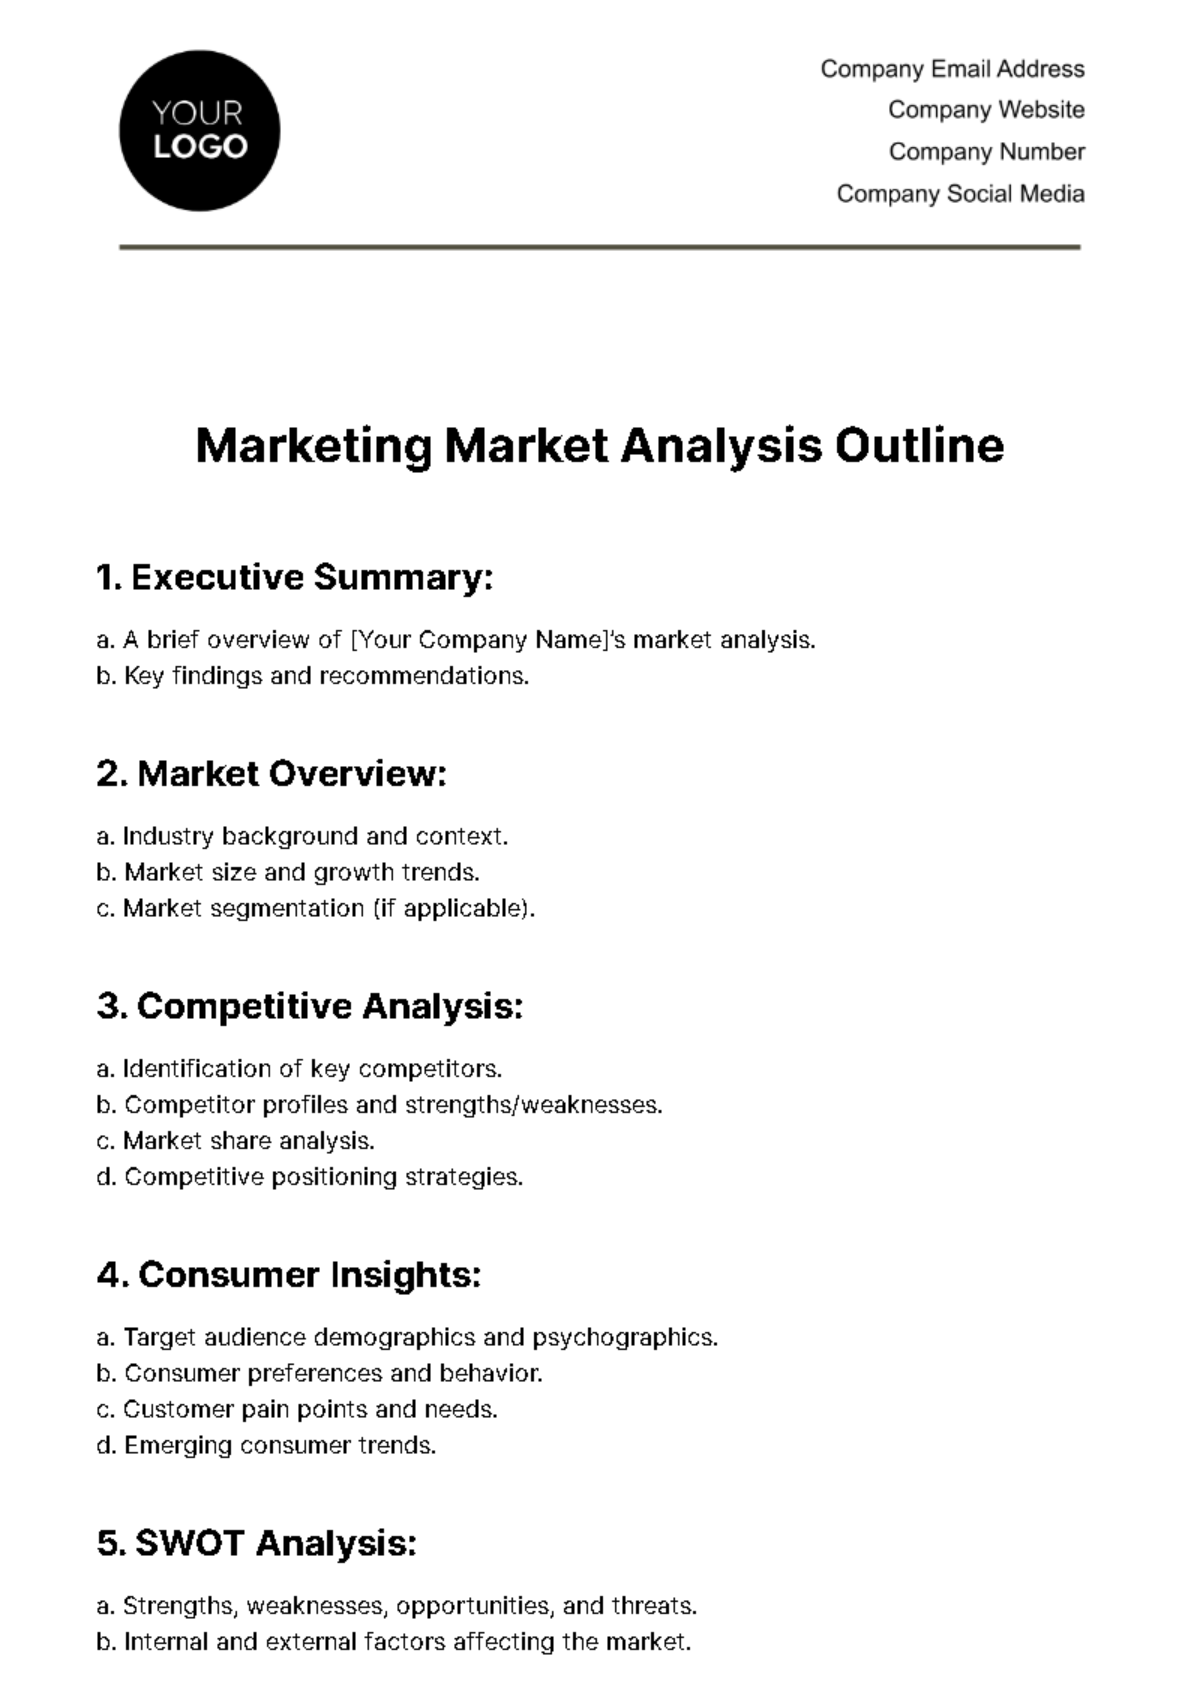 Free Marketing Market Analysis Outline Template